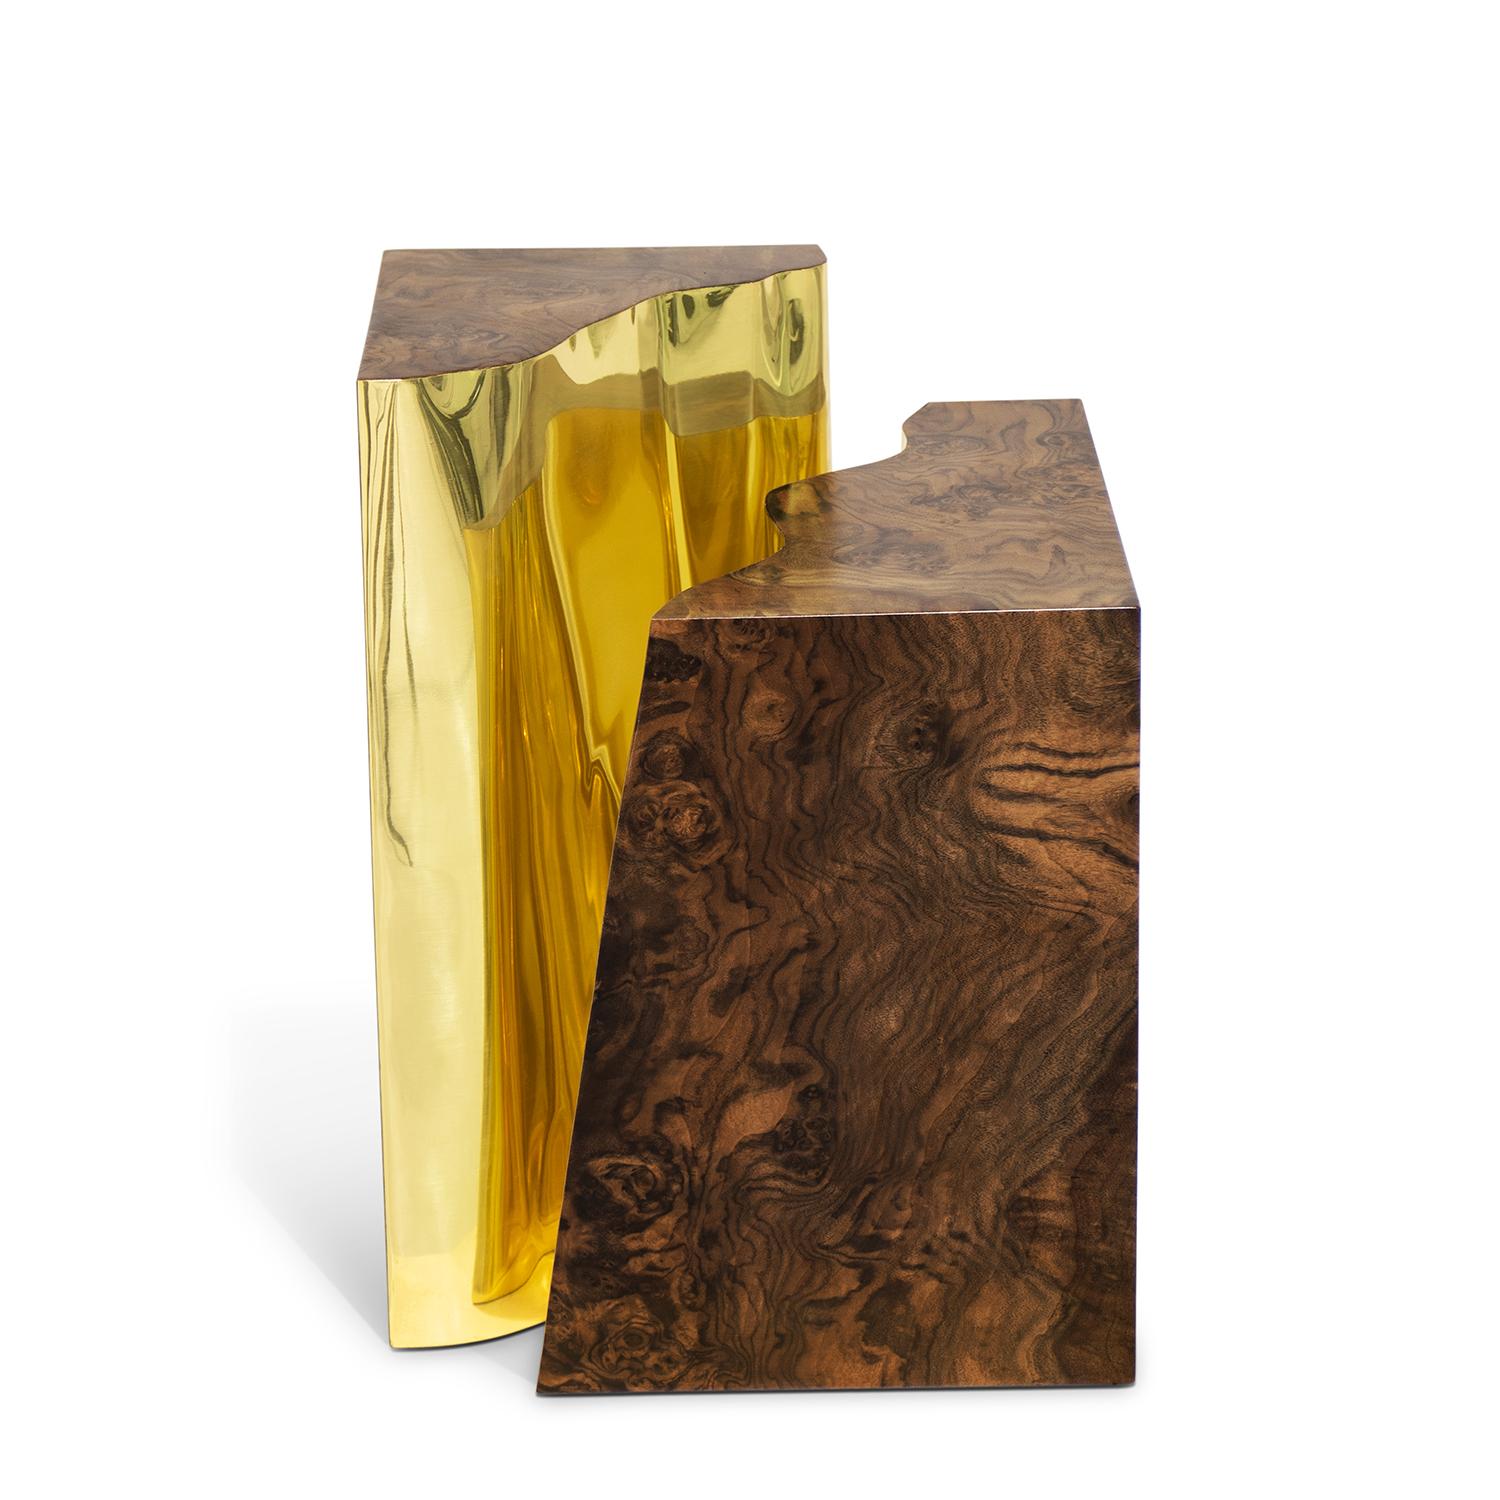 Side Table Paradise Walnut features a Walnut root veneer 
structure with its inside finished in polished brass, outsides 
finished in veered and varnished solid walnut wood.
